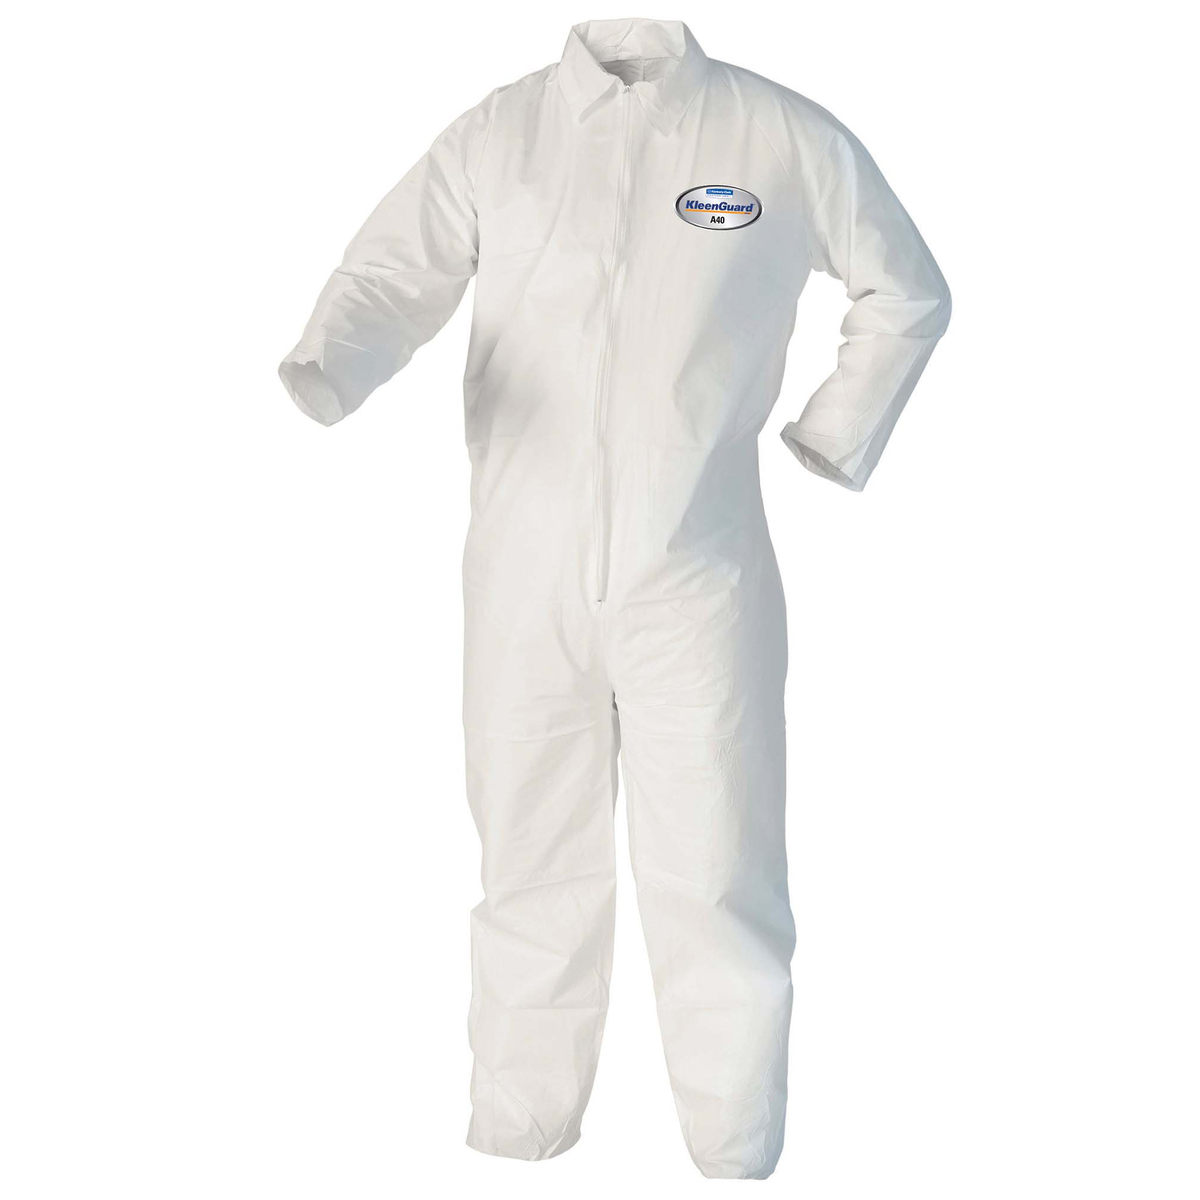 Kimberly-Clark Professional™ 2X White KleenGuard™ A40 Film Laminate Disposable Coveralls (Availability restrictions apply.)